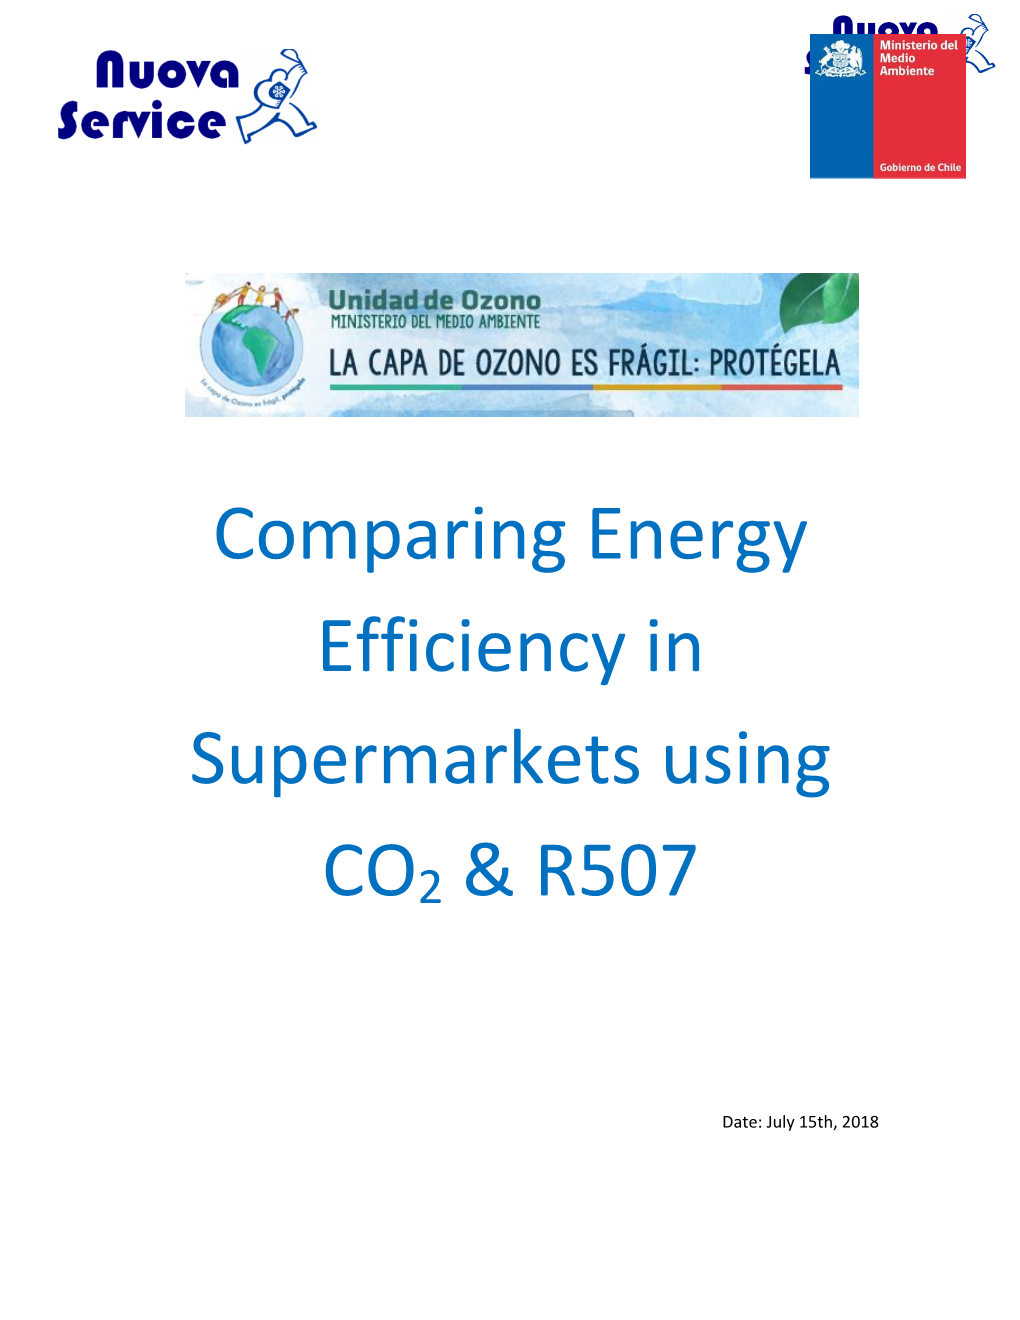 Comparing Energy Efficiency in Supermarkets Using CO2 & R507